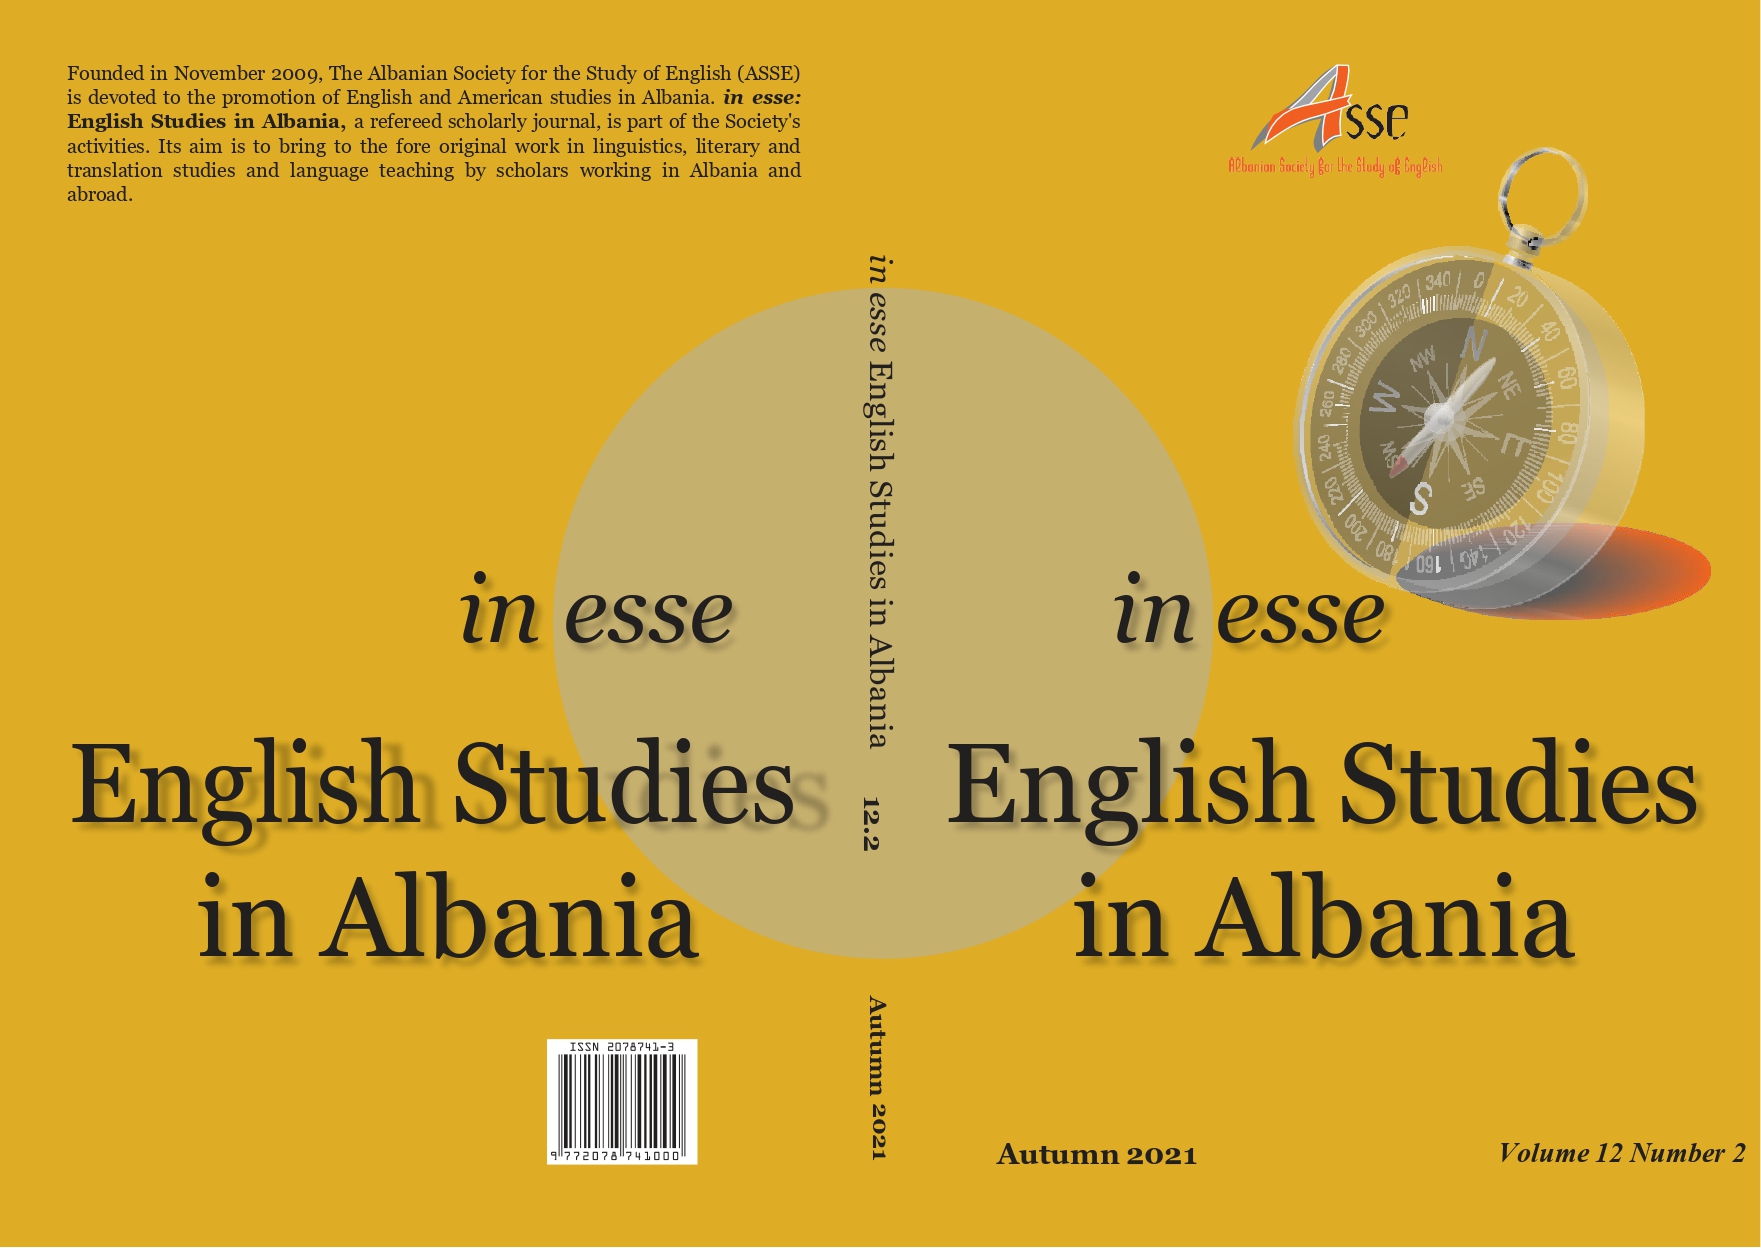 A contrastive analysis of “verb +complement” structures in English and Albanian